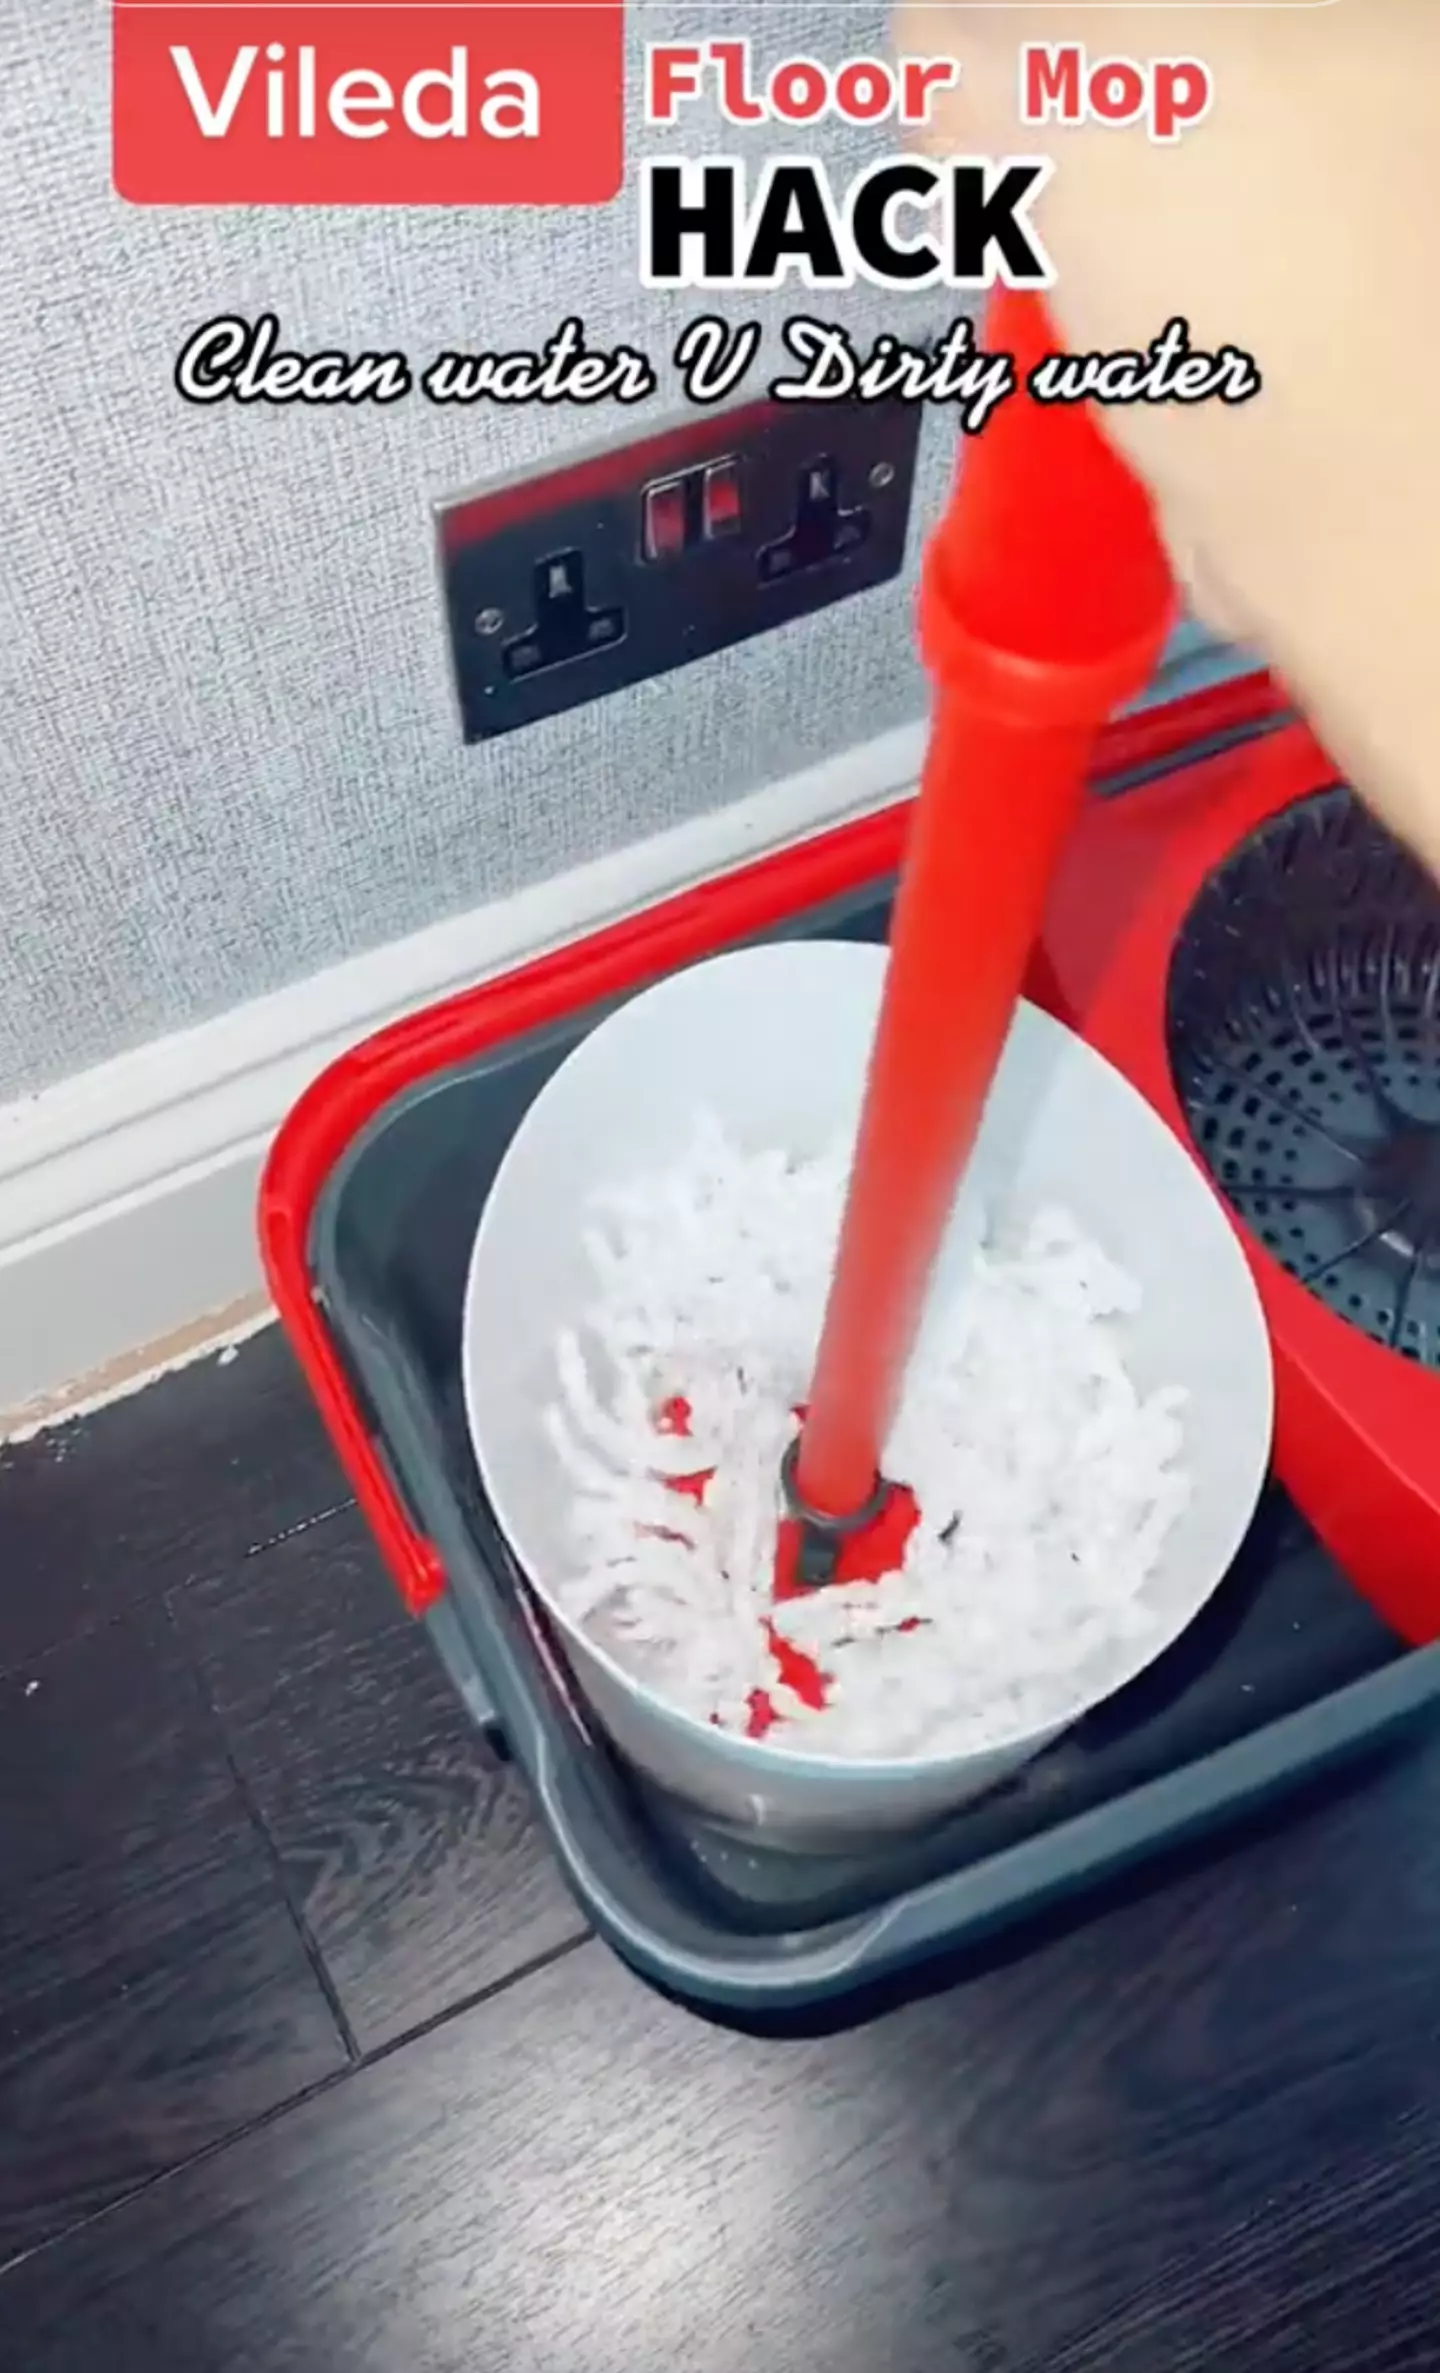 Using this simple trick ensures the dirty mop never goes back into dirty water after straining.